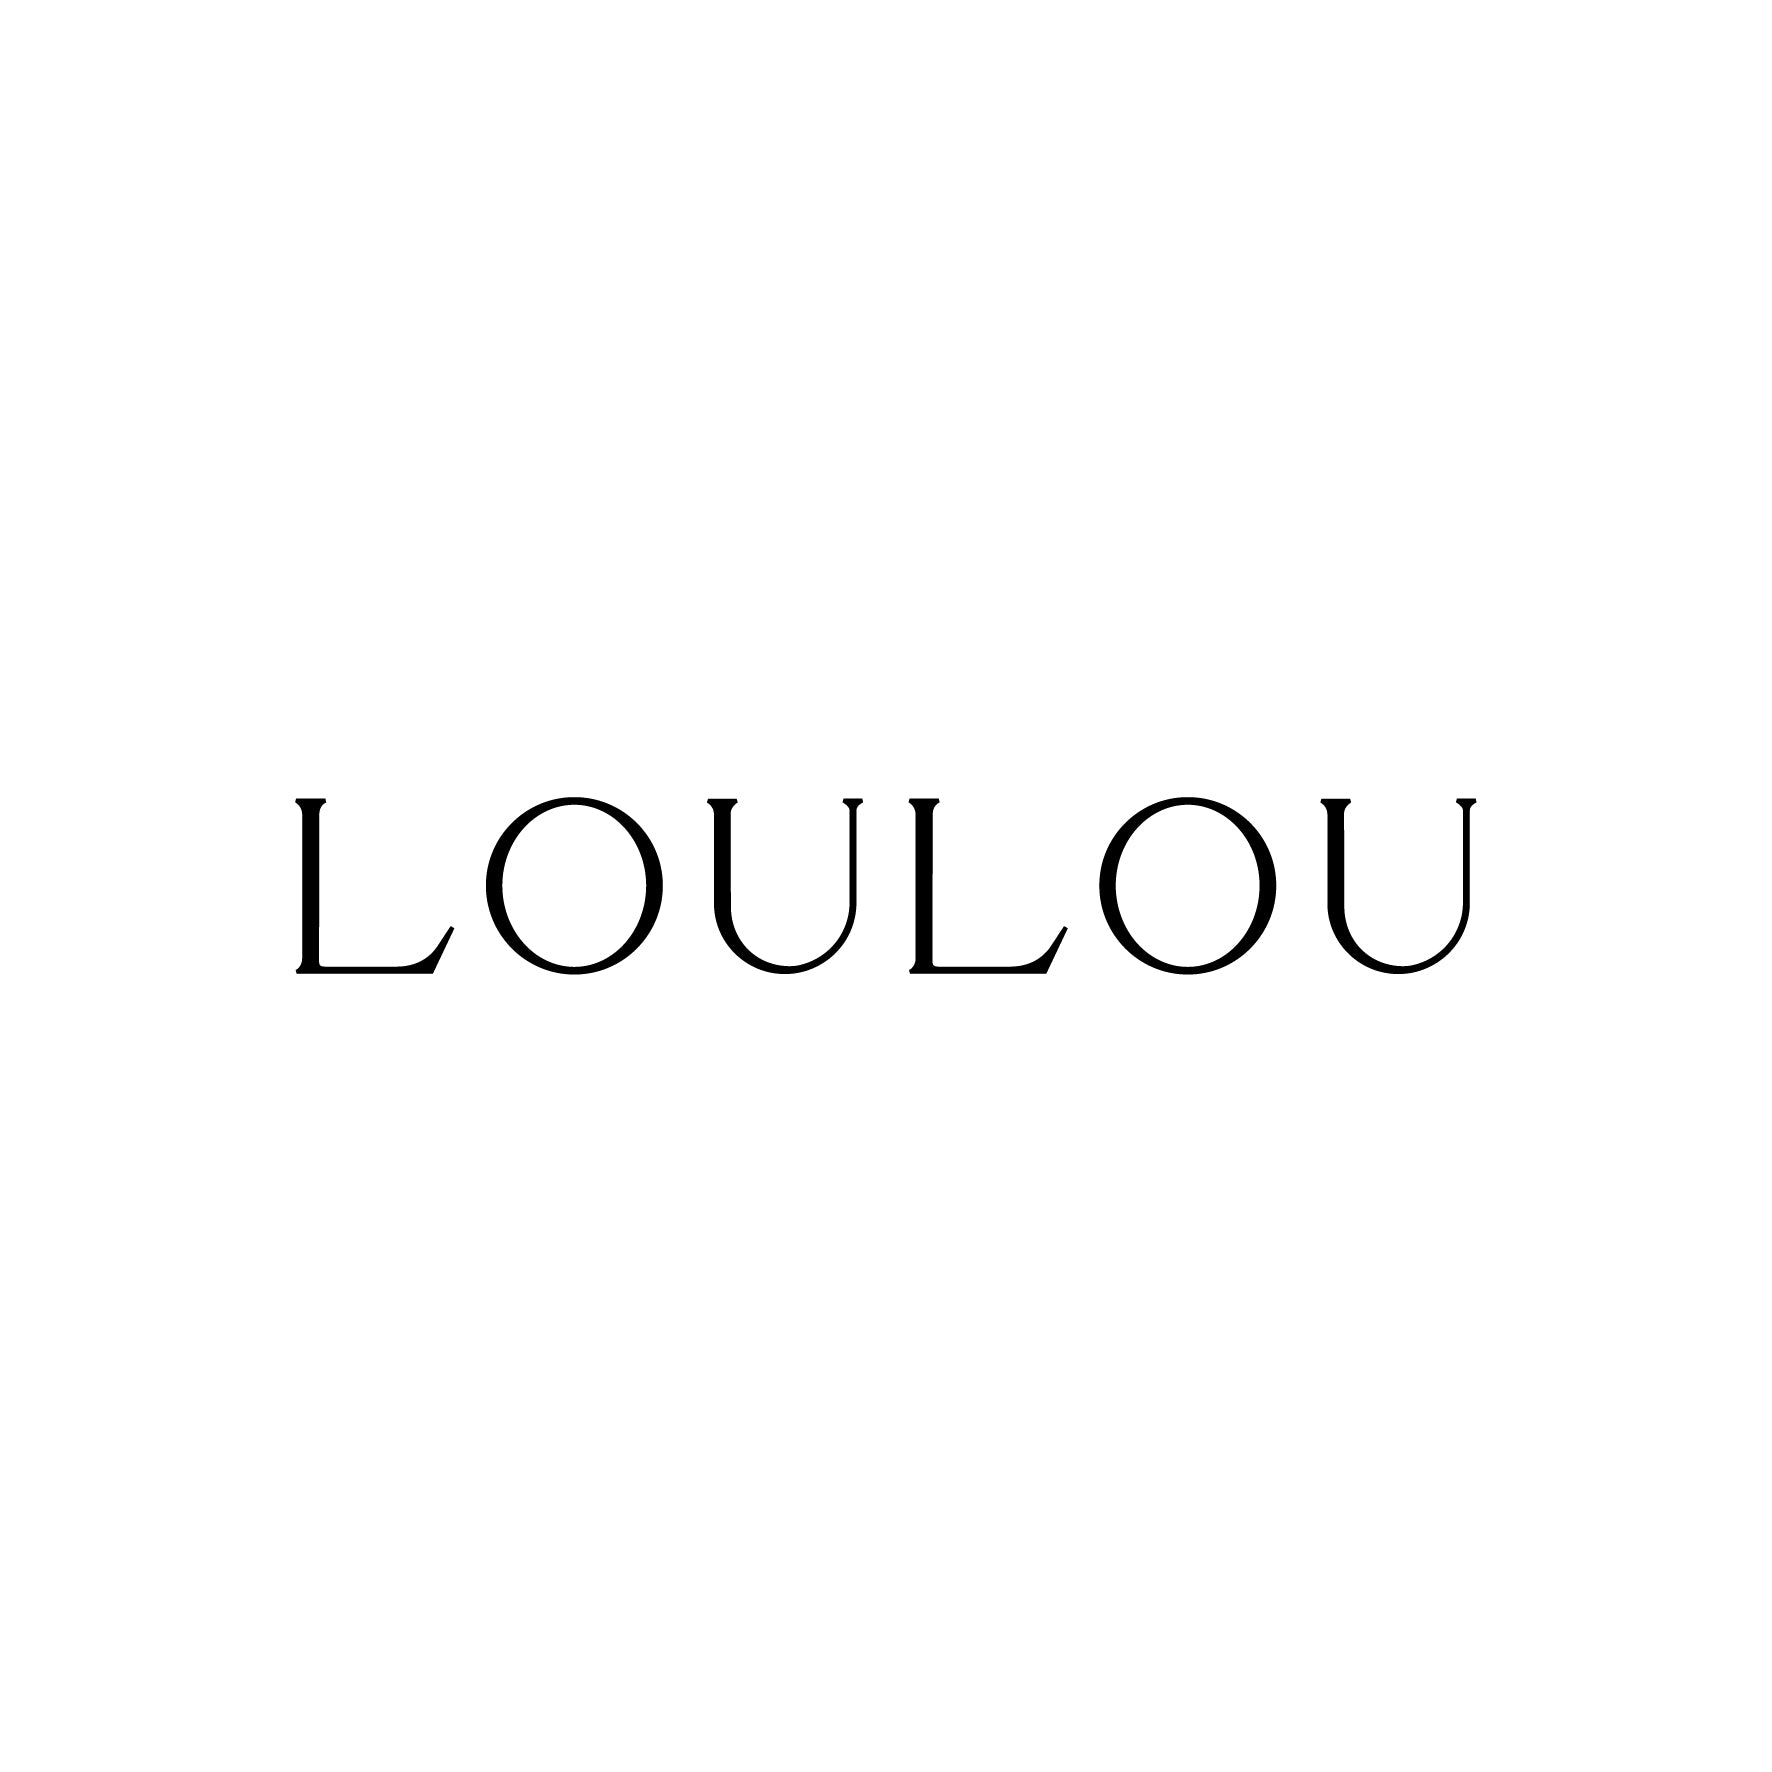 LOULOU's Official Website